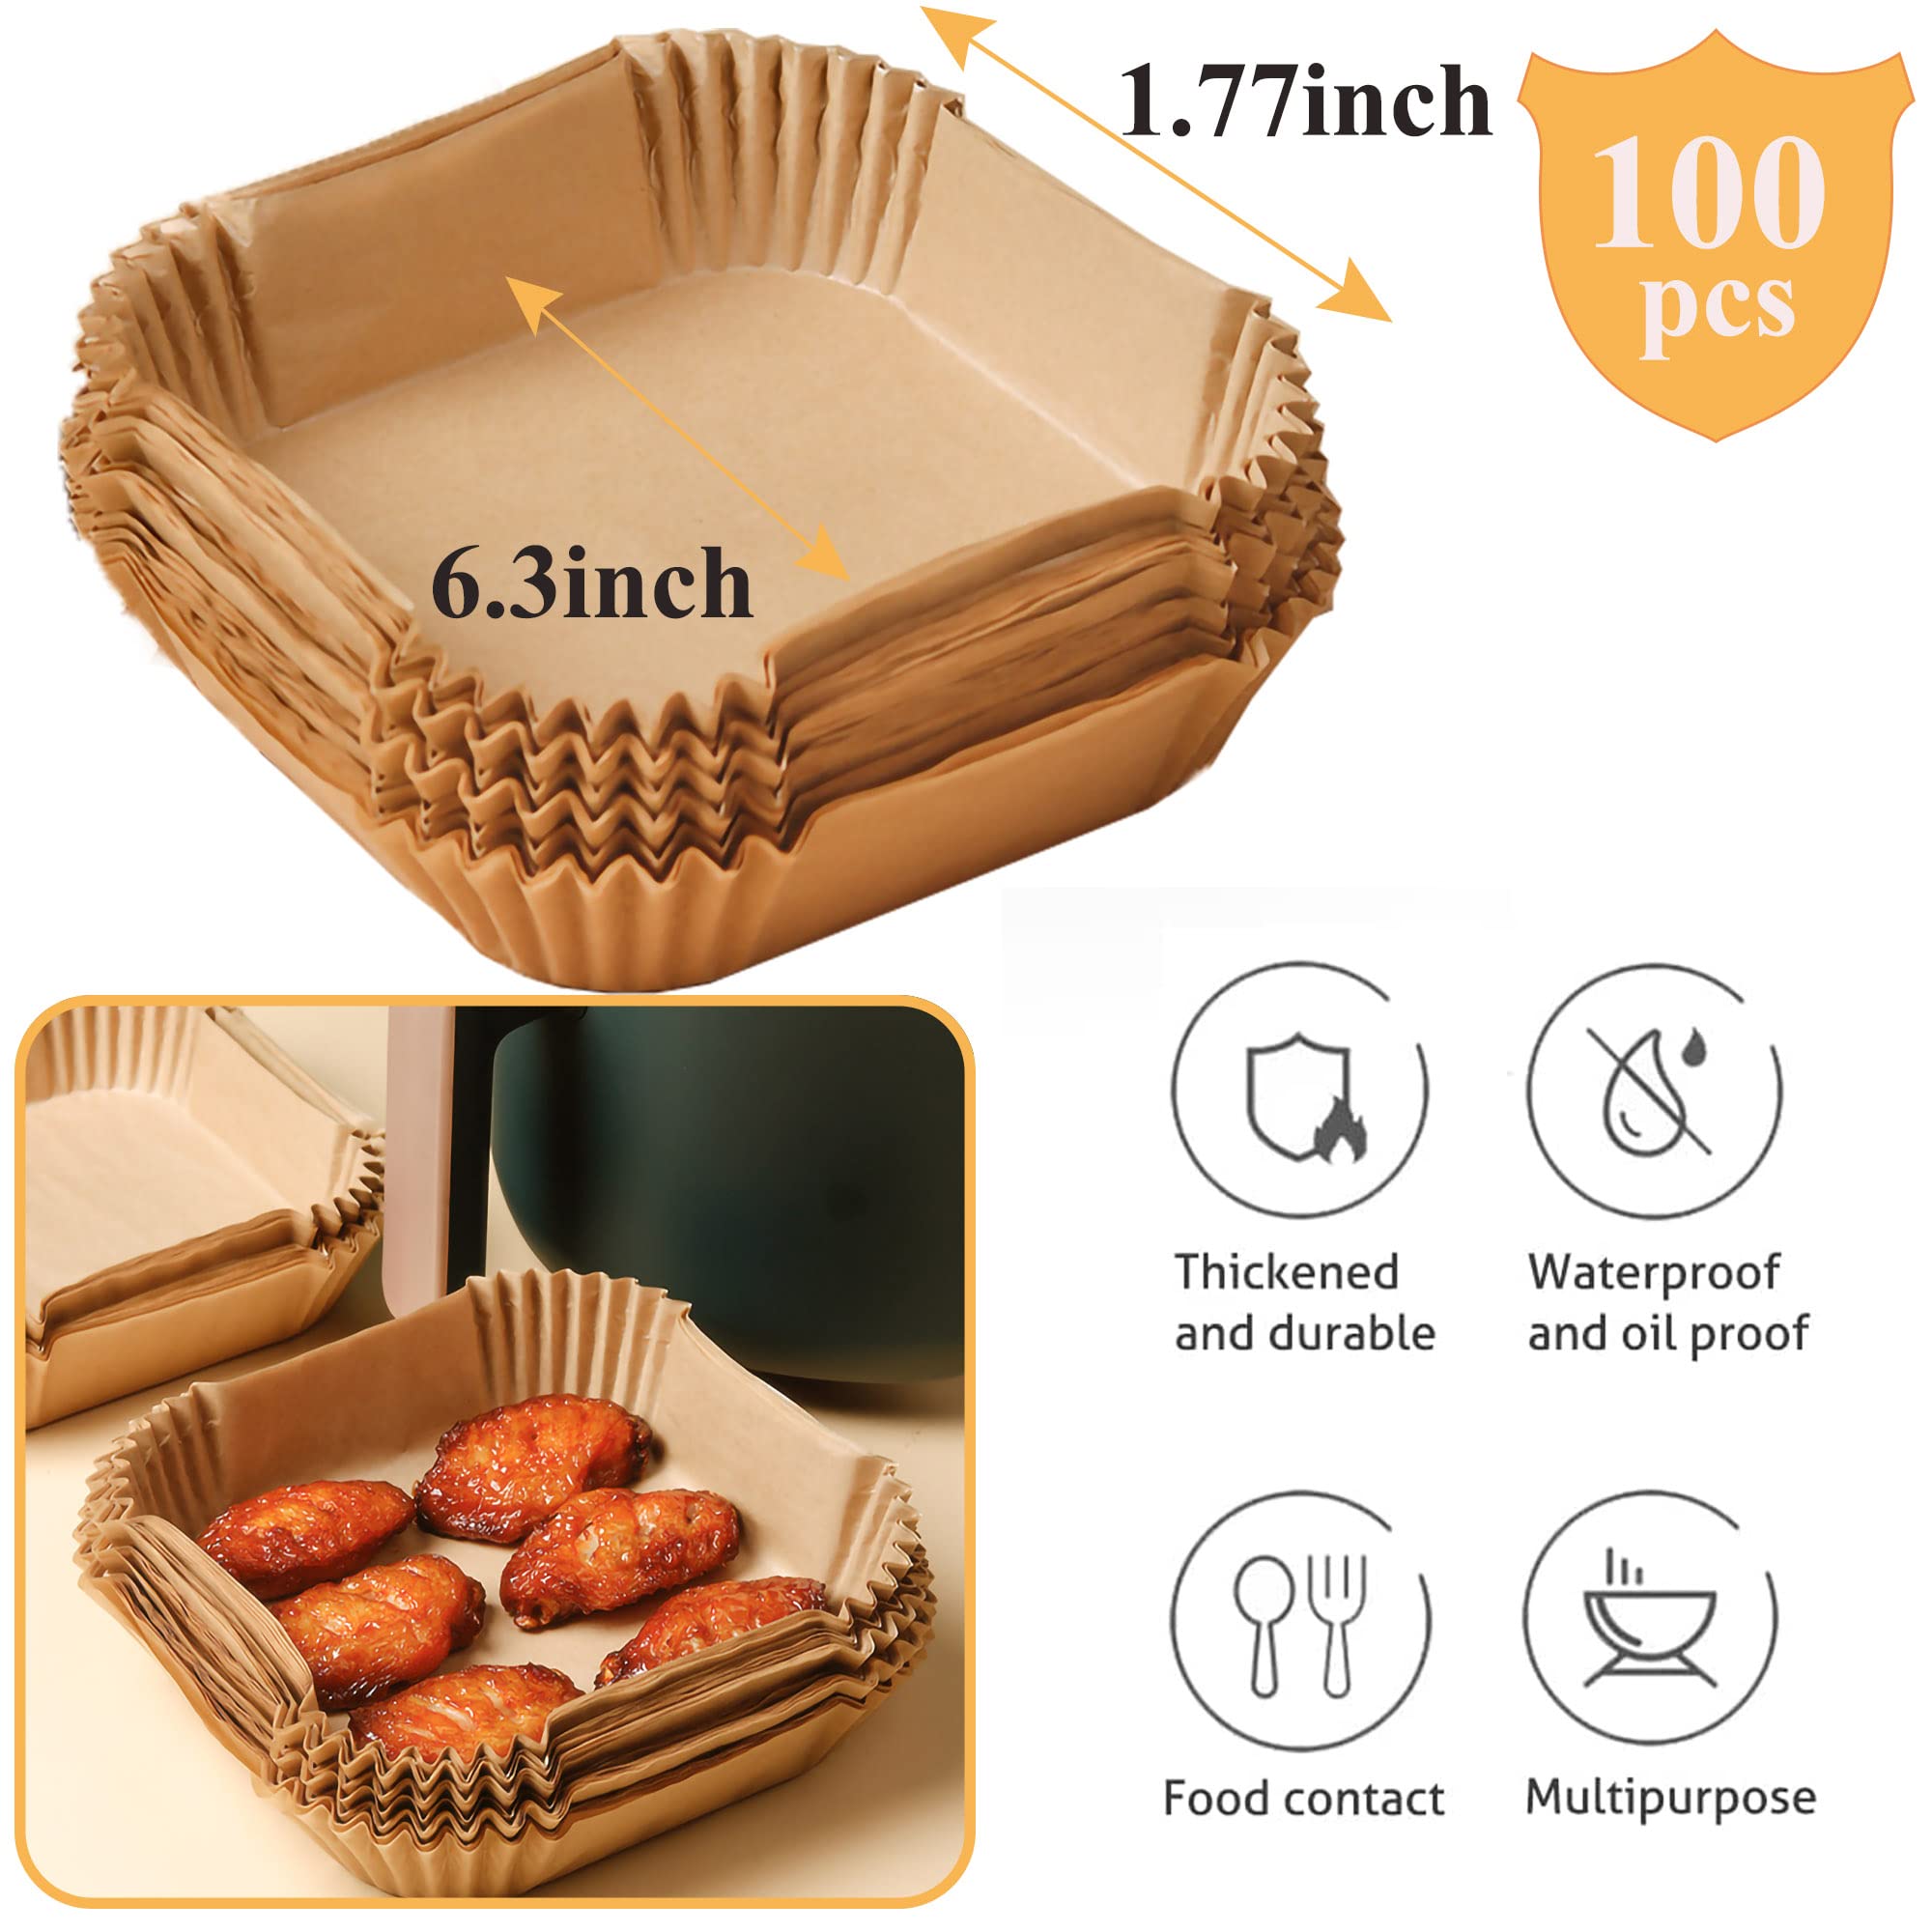 Air Fryer Disposable Paper, 100Pcs Parchment Paper Liners, Non-stick Cooking Paper, Oil Resistant, 6.3inch for 3-5Qt Air Fryer Baking Roasting Microwave (6.3IN-Square)